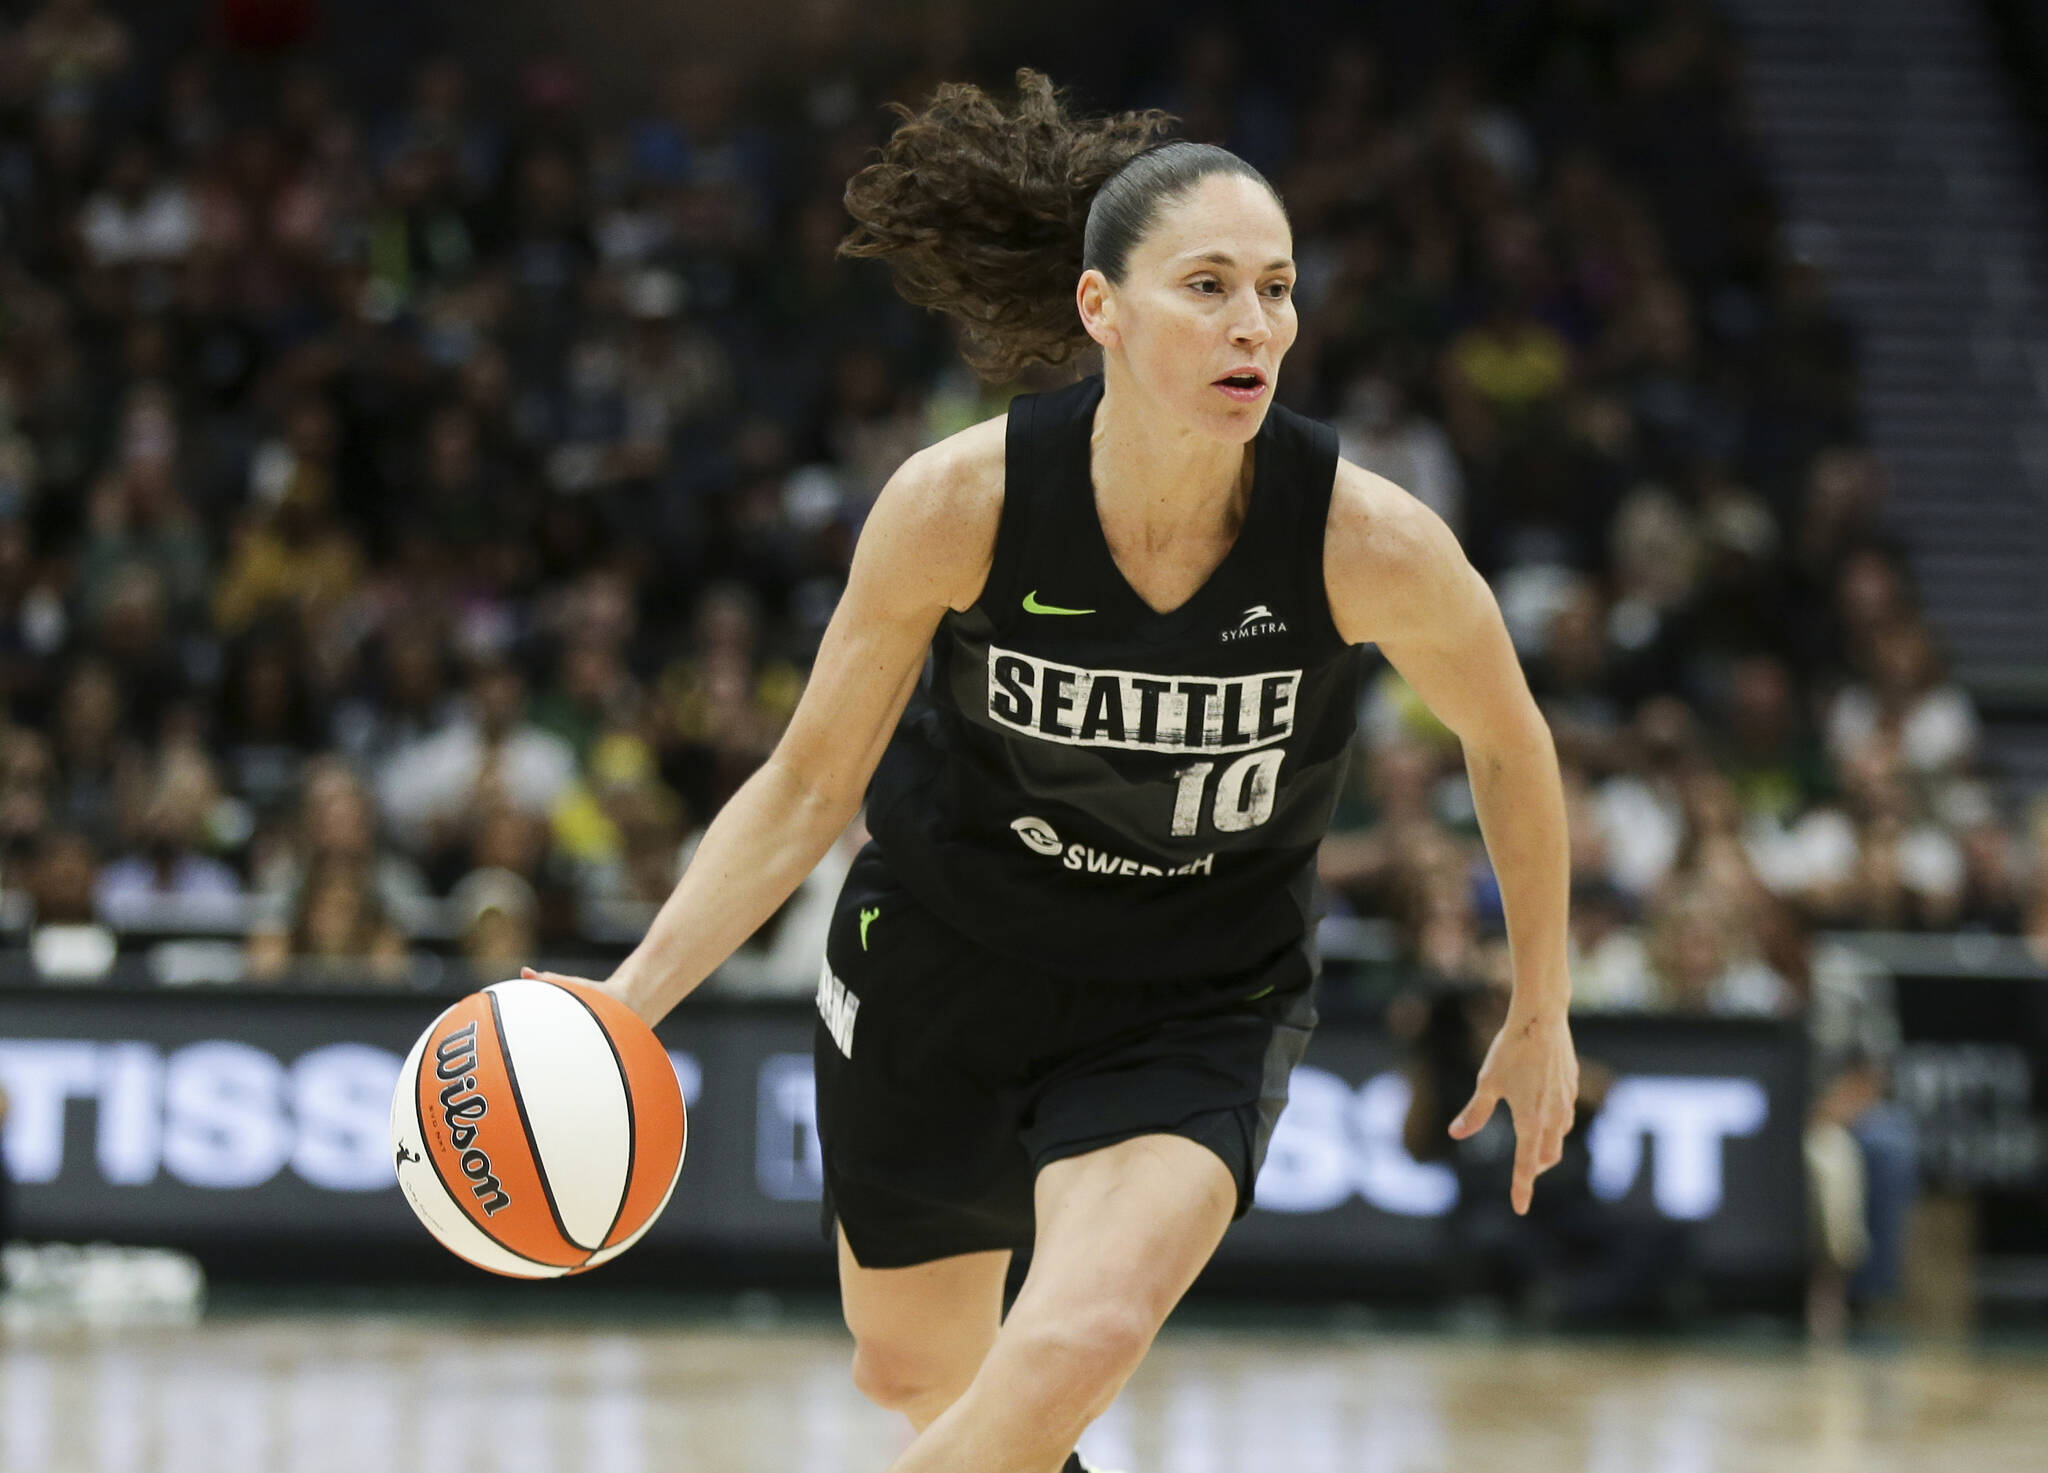 Seattle Storm guard Sue Bird brings the ball up against the Washington Mystics during the second half of Game 1 of a WNBA basketball first-round playoff series Aug. 18, 2022, in Seattle. The Storm’s owners, Force 10 Hoops, said Wednesday that Bird has joined the ownership group. (AP Photo/Lindsey Wasson, File)